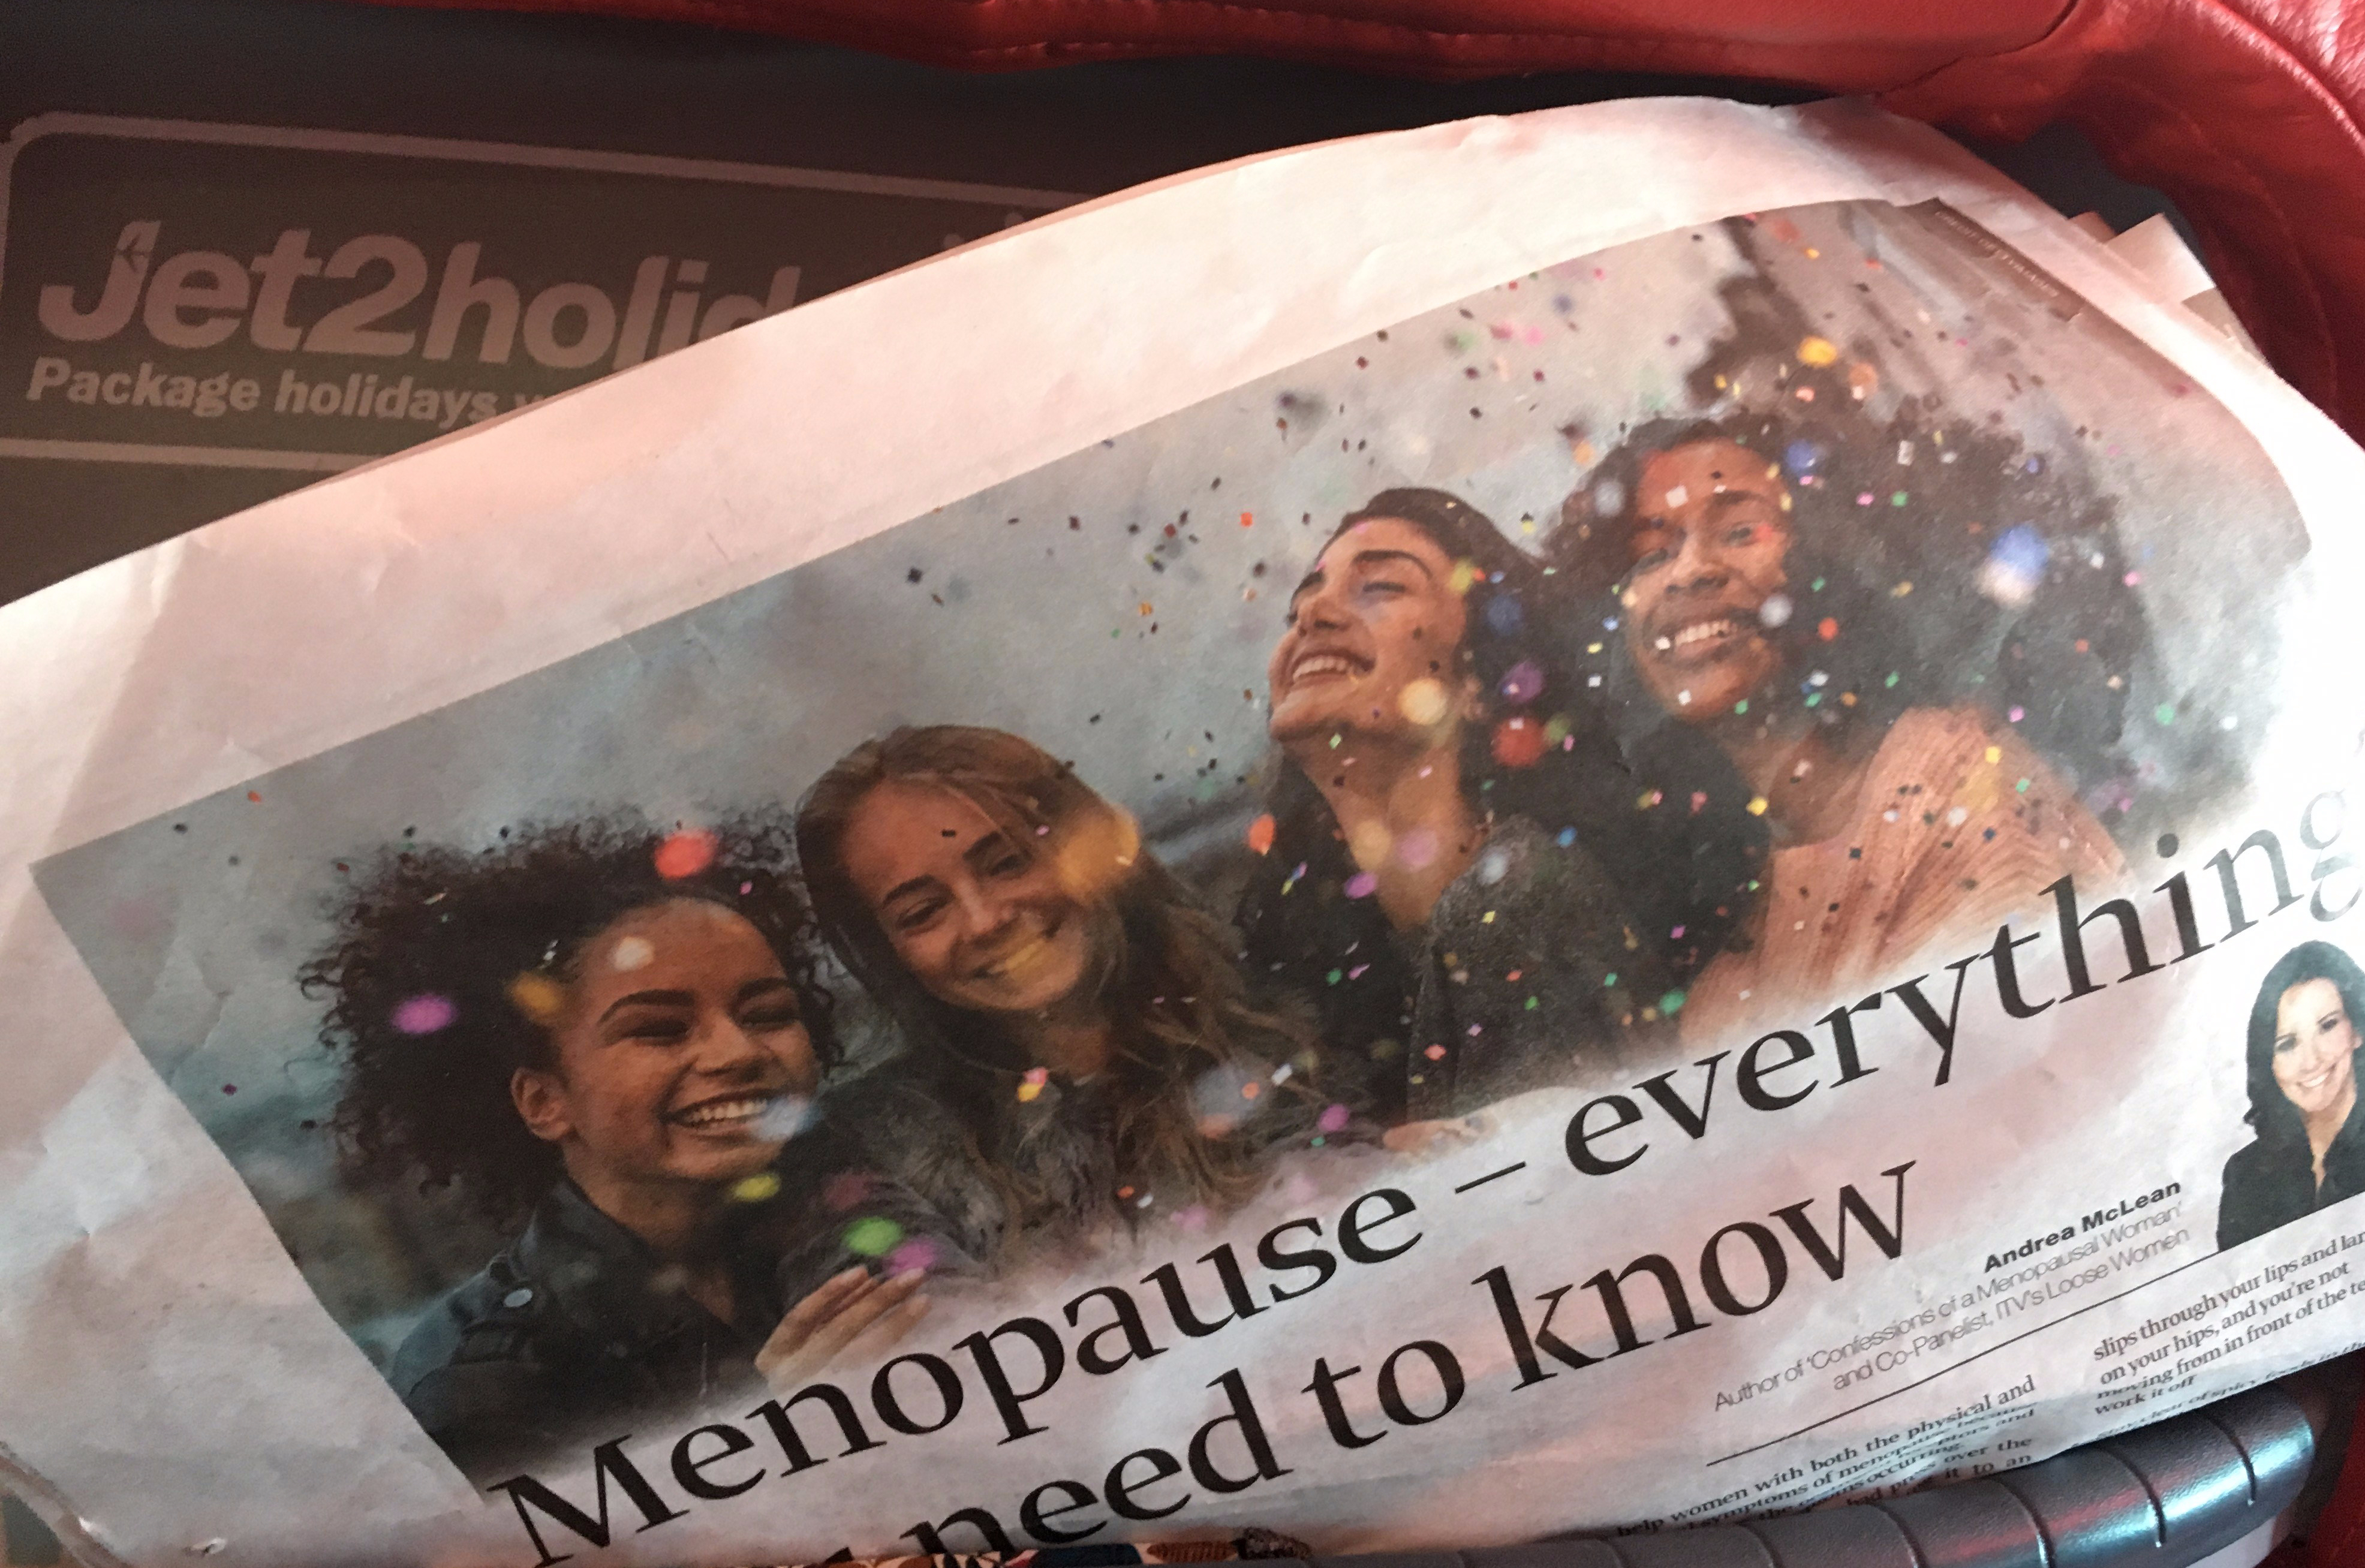 A newspaper article on the Menopause